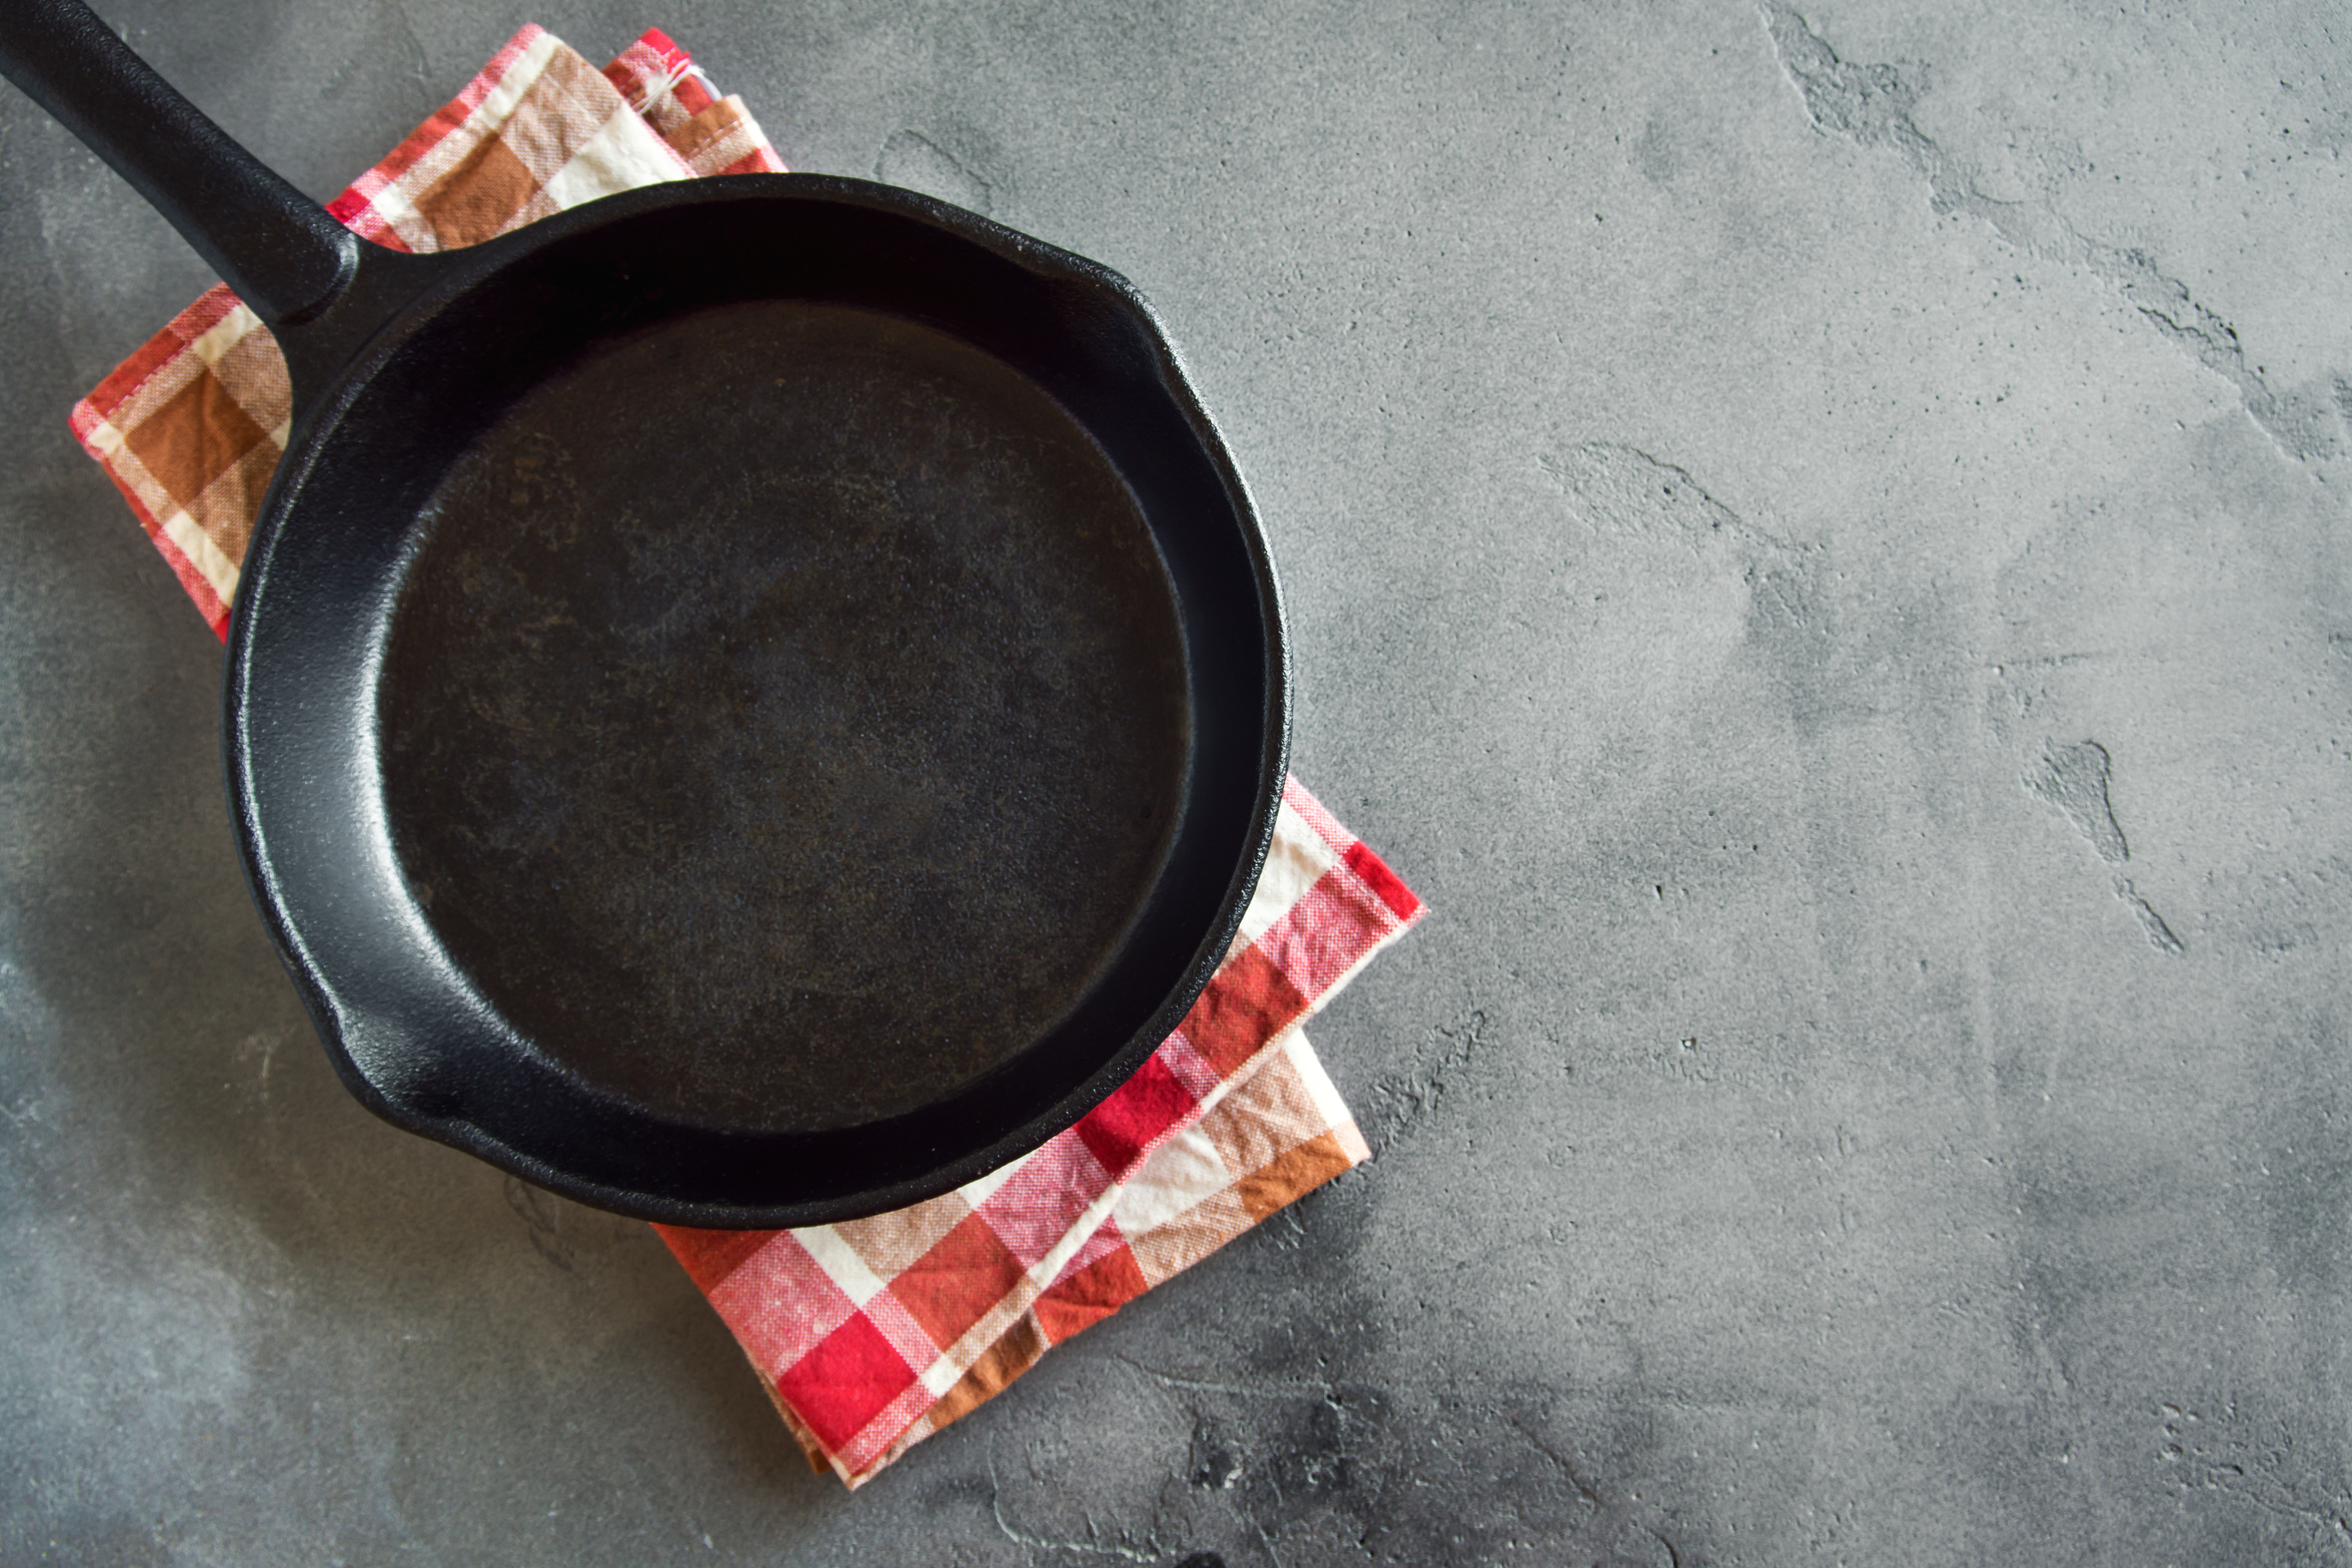 Caring For Cast-Iron Cookware Is Easy